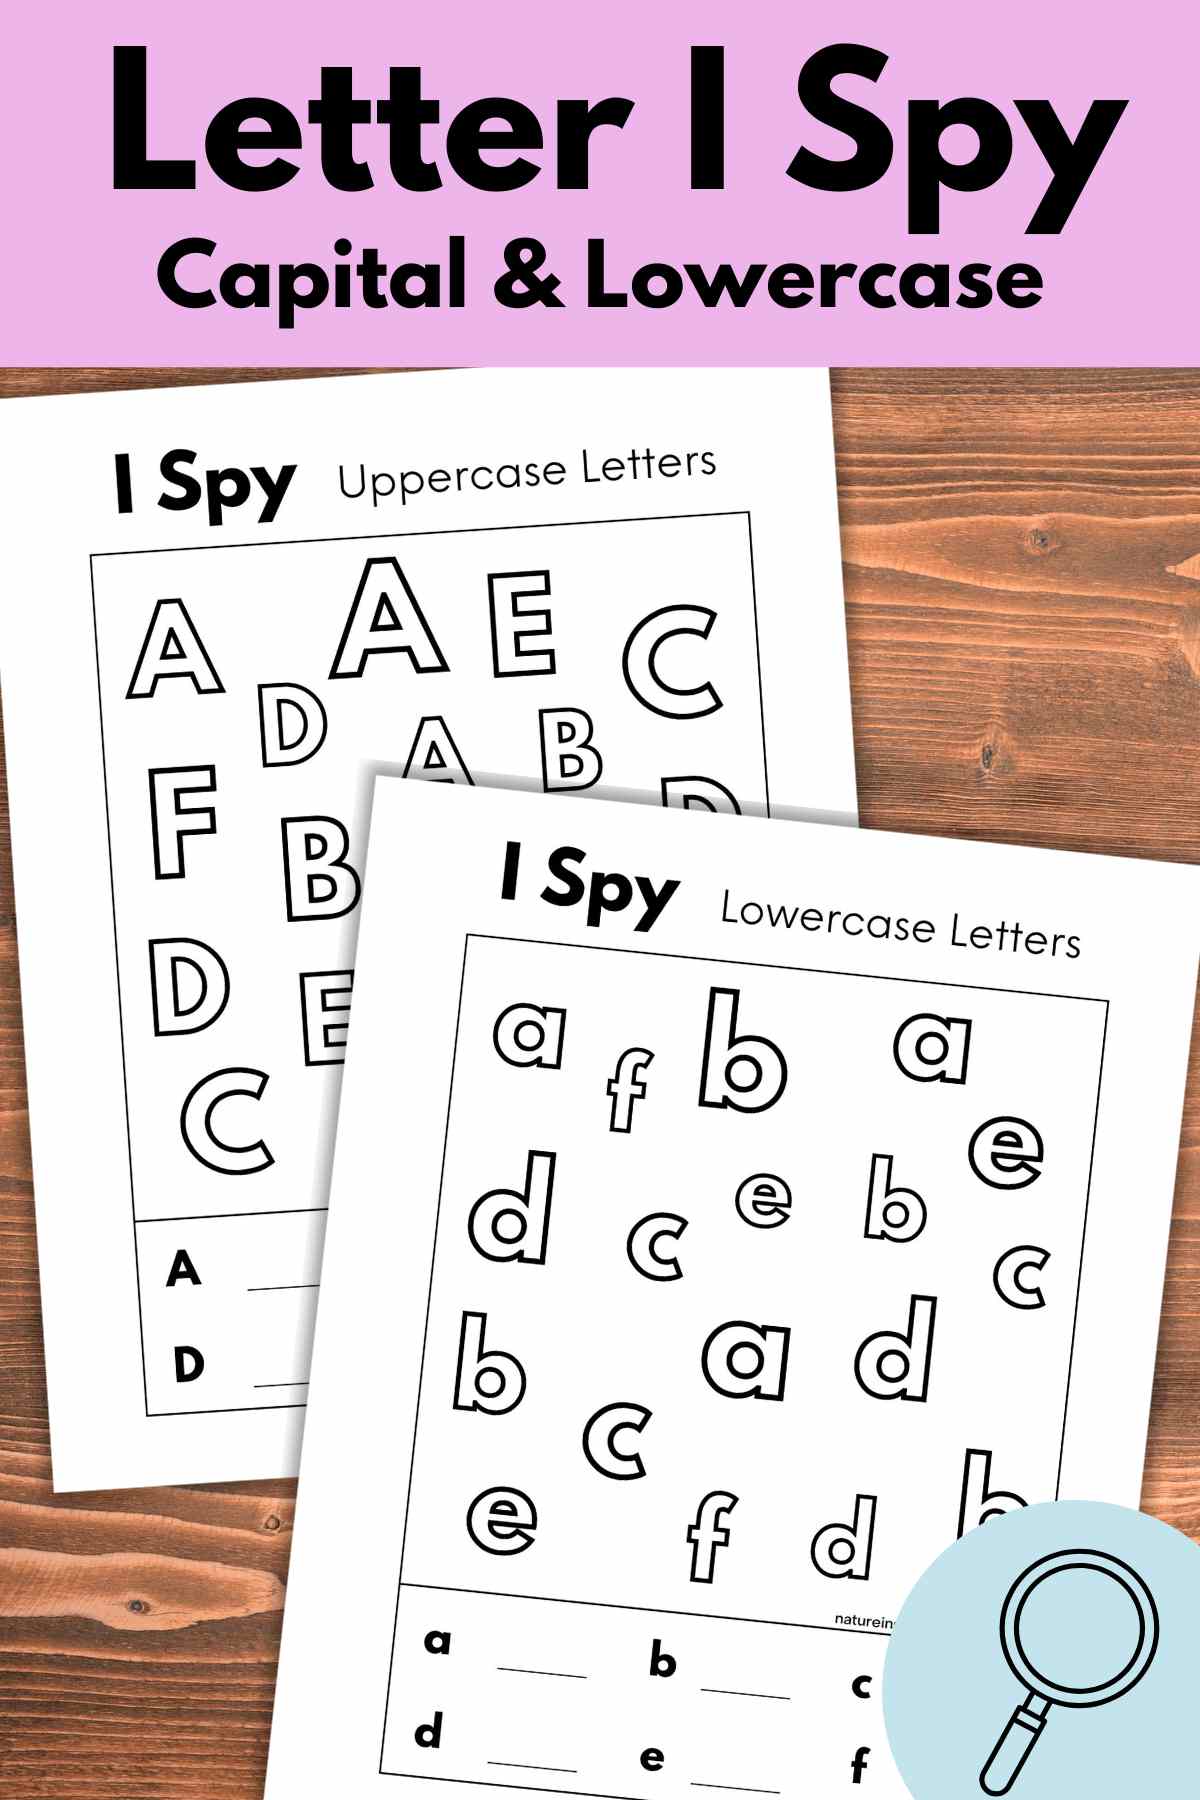 Two black and white letter I spy worksheets overlapping on a wooden background with a light blue circle bottom left with magnifying lens. One printable has uppercase letters the other has lowercase letters. Light purple rectangle across the top with black text overlay.